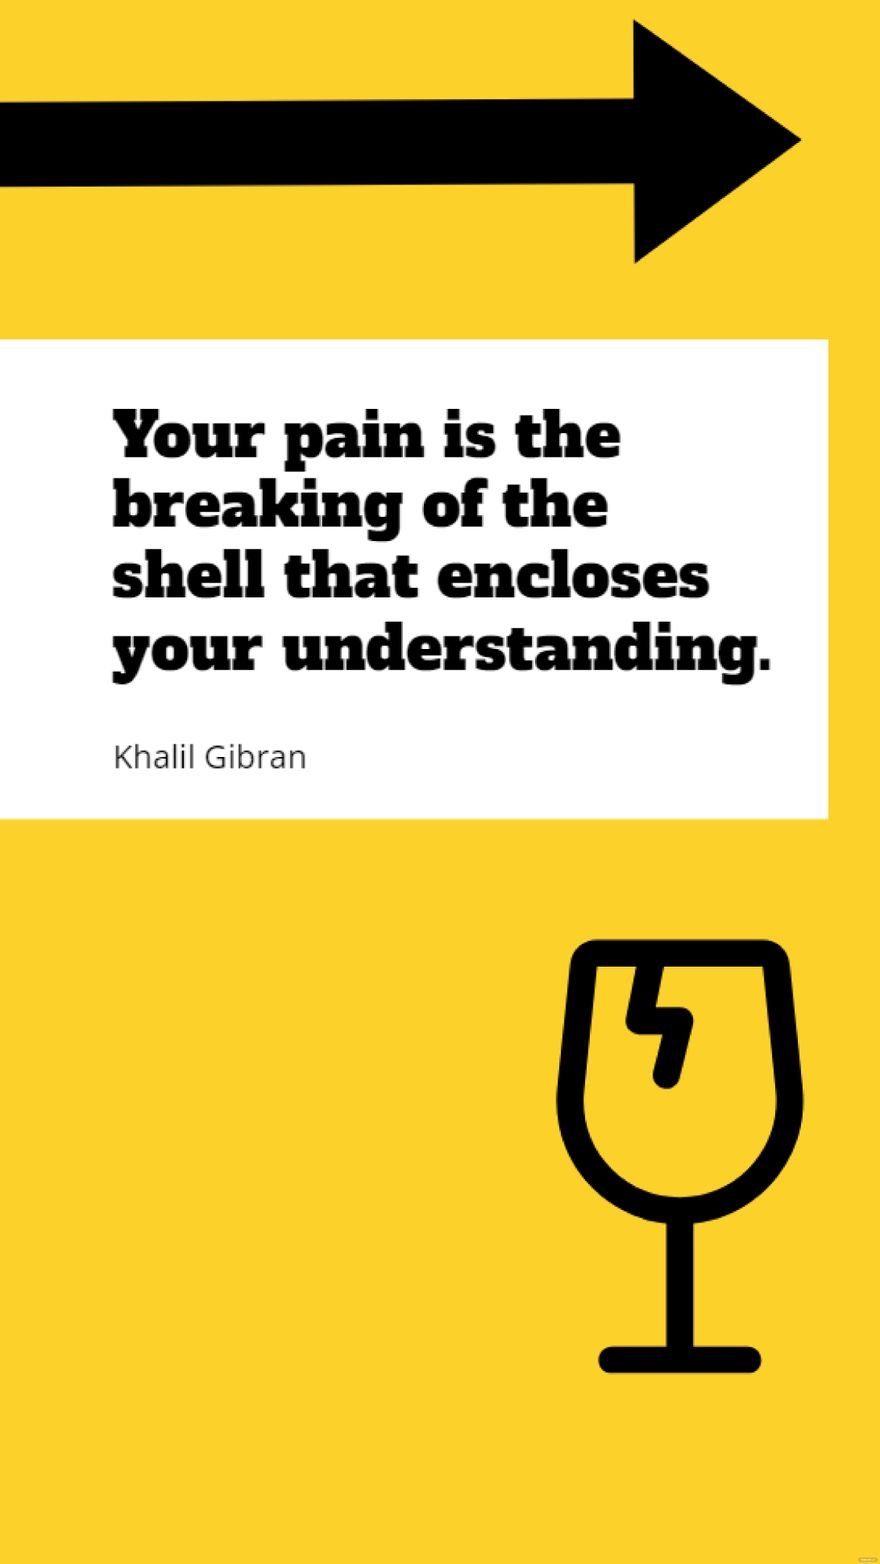 Khalil Gibran - Your pain is the breaking of the shell that encloses your understanding.